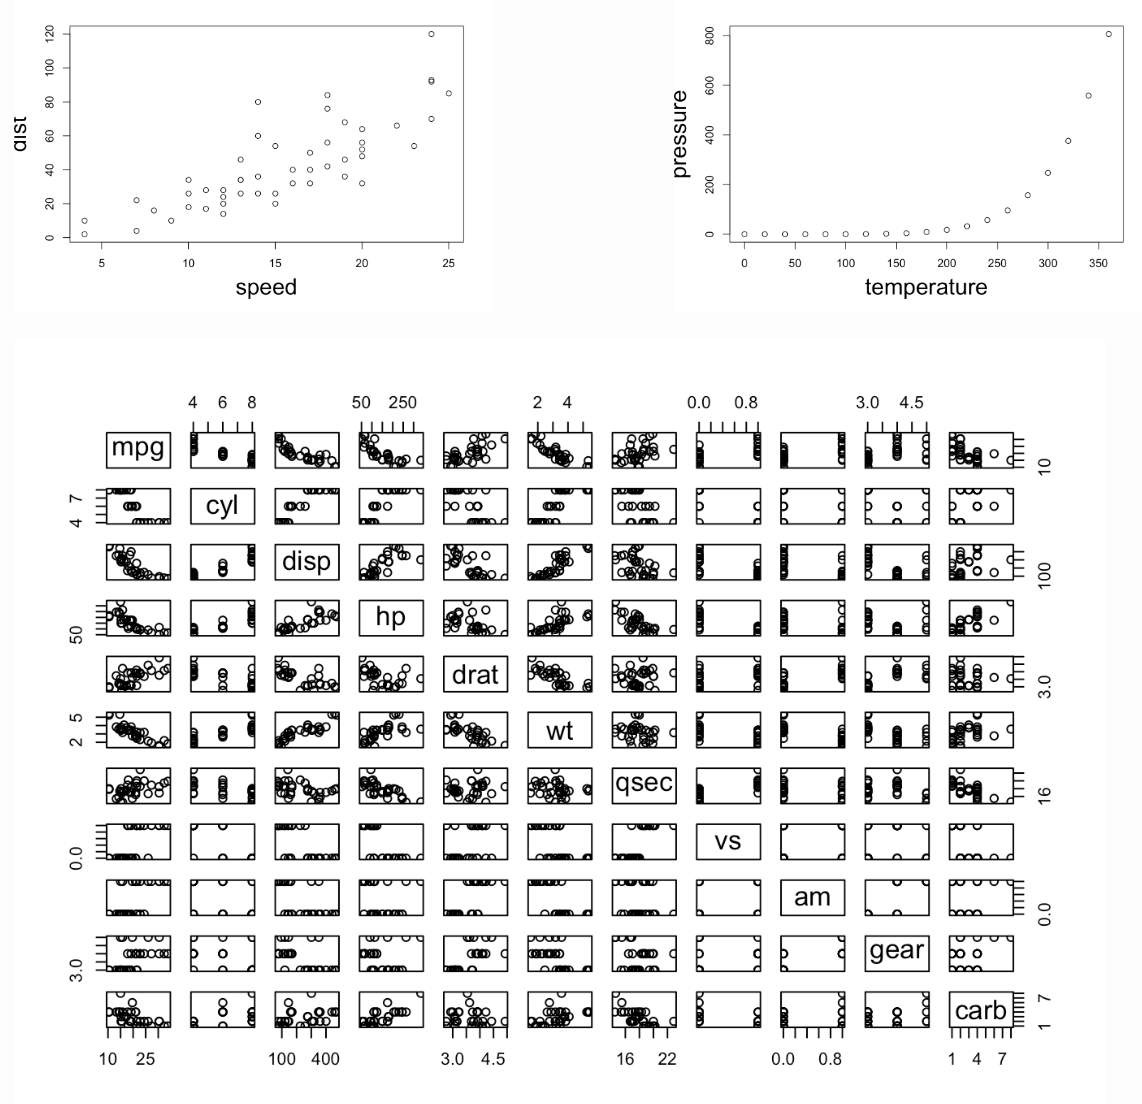 Two side-by-side scatter plots of the `cars` and `pressure` datasets, with a larger plot below them visualizing the `mtcars` dataset across an 11x11 grid. The bottom plot, larger than the two above combined, maps all 11 variables against each other. The diagonal features text labels for each variable: 'mpg', 'cyl', 'disp', 'hp', 'drat', 'wt', 'qsec', 'vs', 'am', 'gear', and 'carb'.